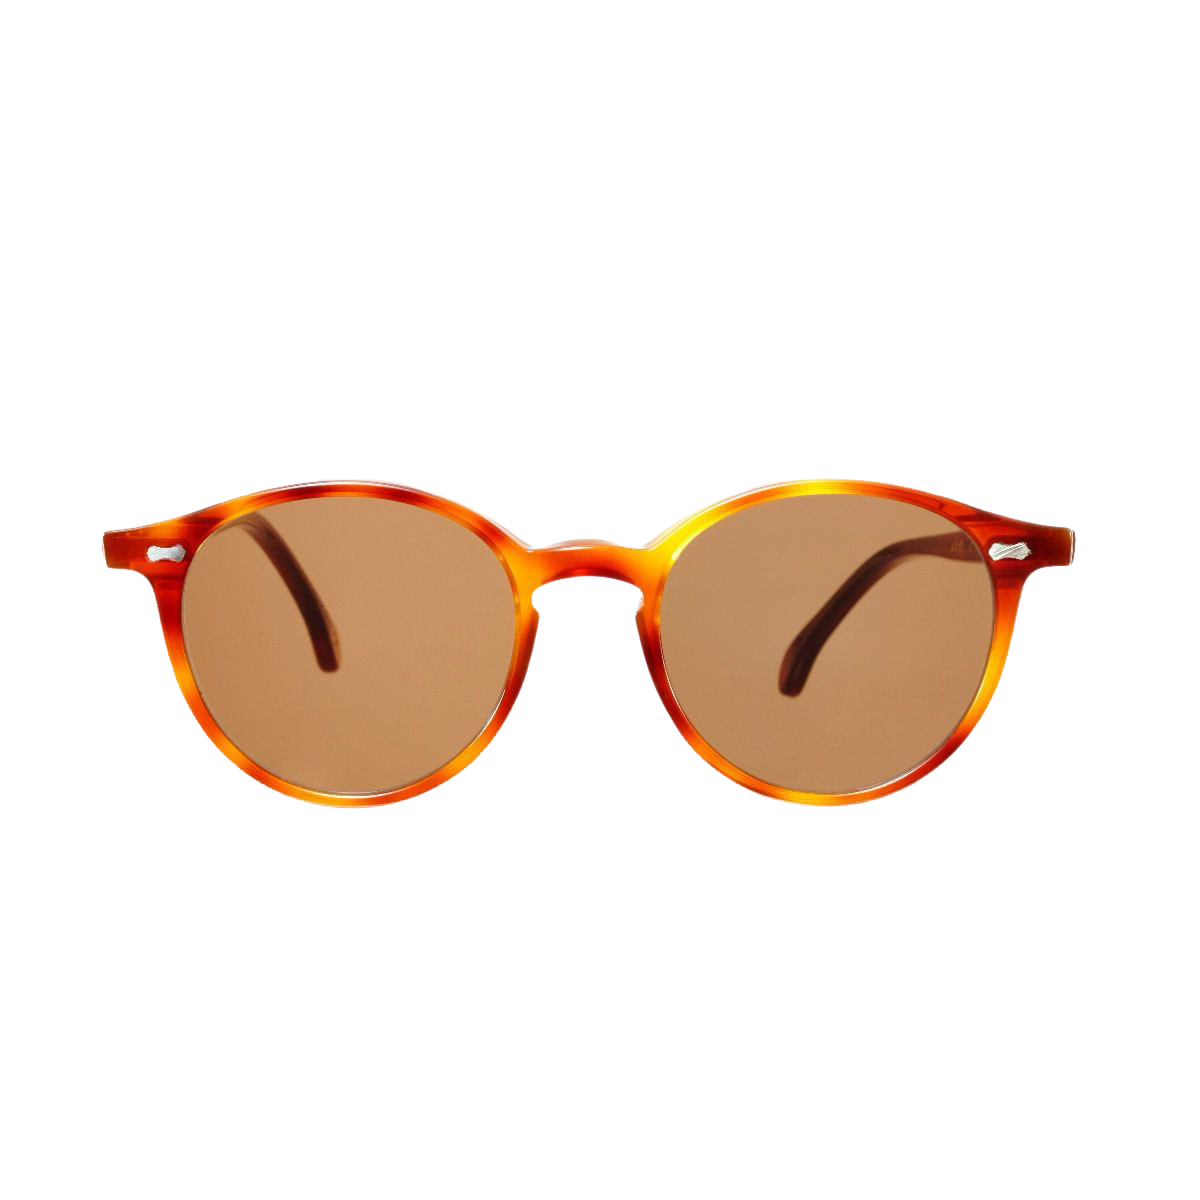 A pair of The Bespoke Dudes handmade sunglasses with a Cran Classic Tortoise frame and high-quality Tobacco lenses.